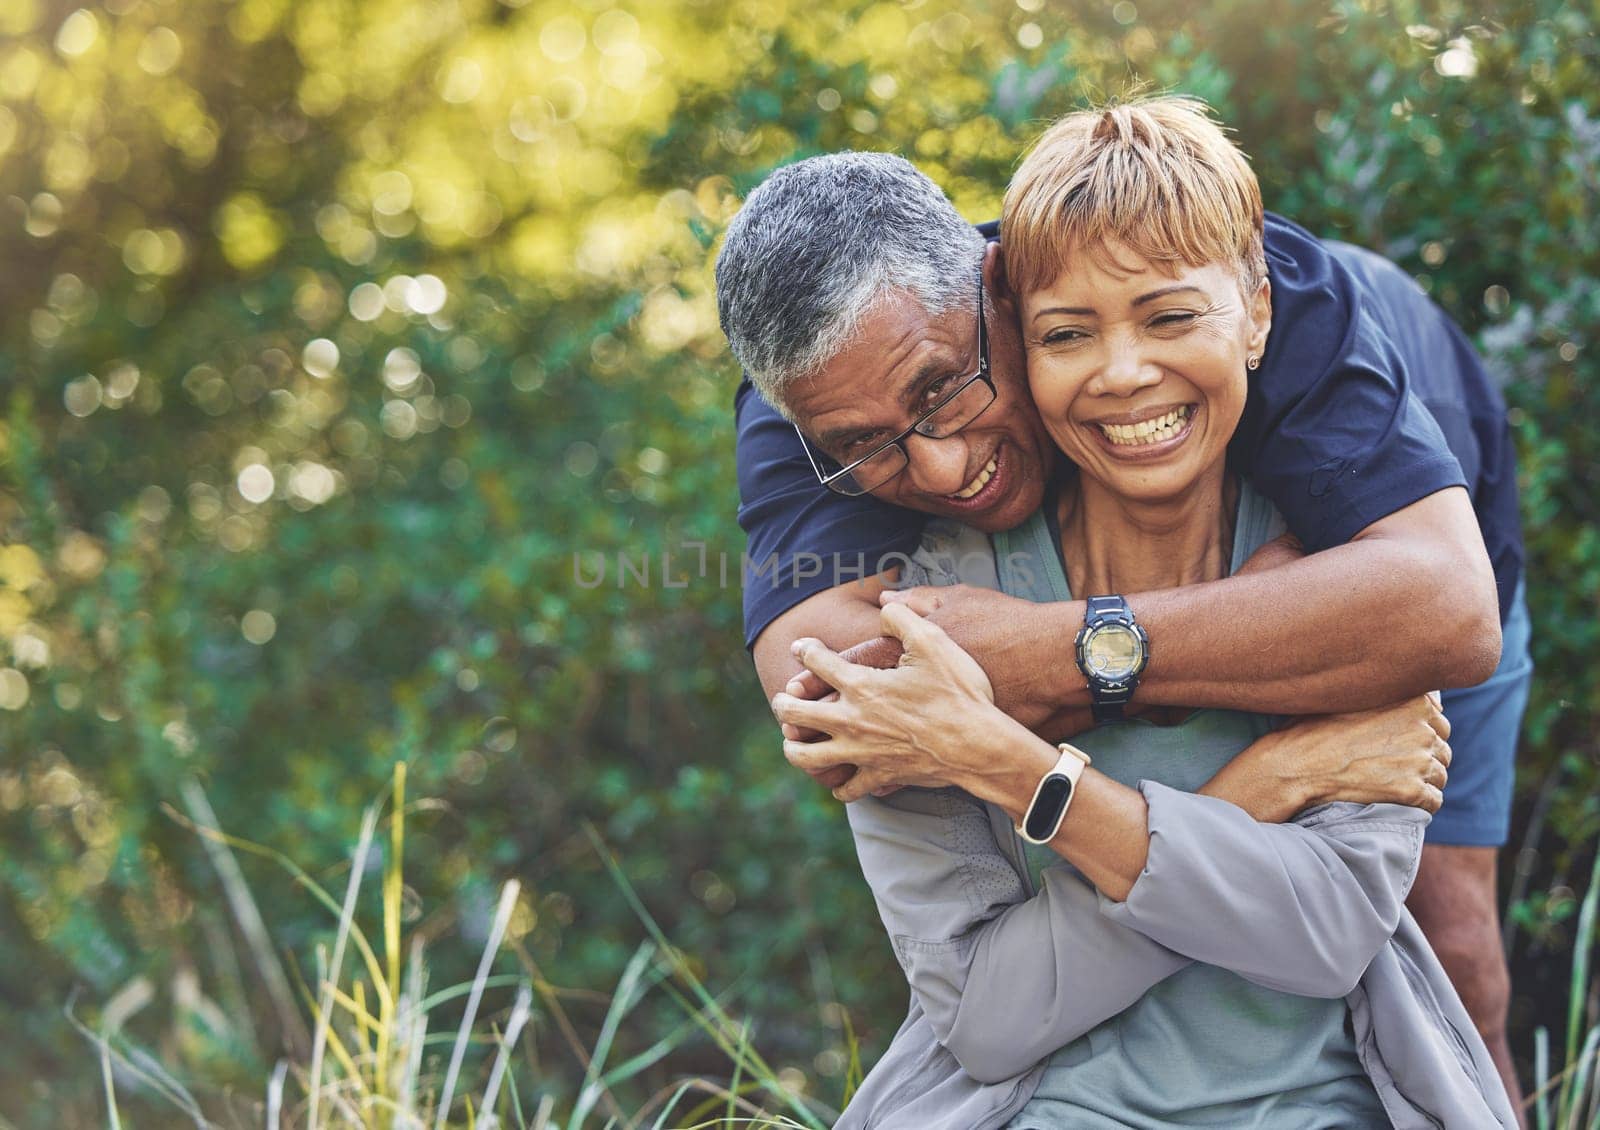 Nature, love and man hugging his wife with care, happiness and affection while on an outdoor walk. Happy, romance and portrait of a senior couple in retirement embracing in the forest, woods or park